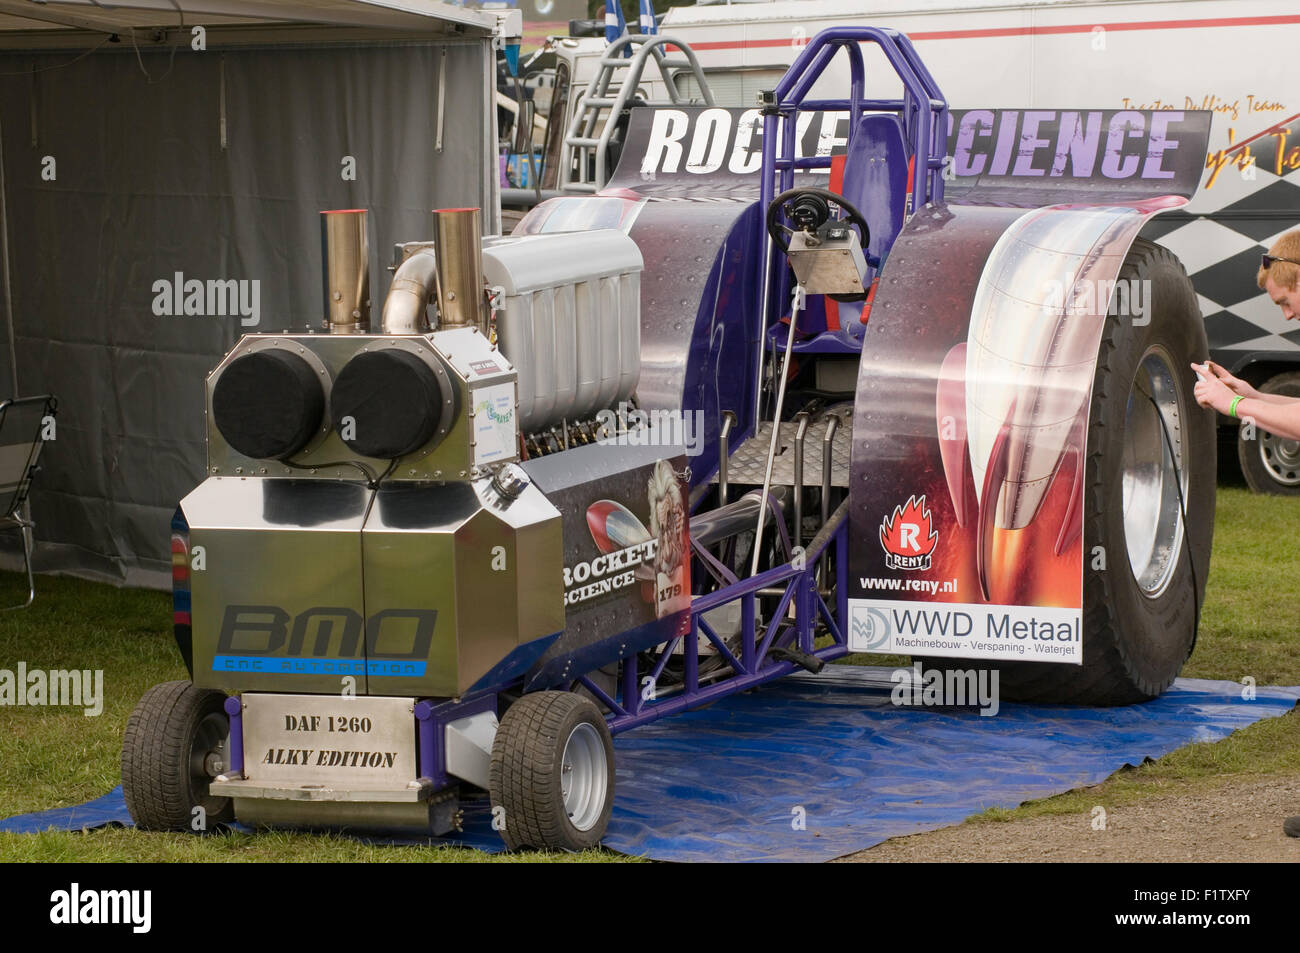 daf truck engine converted to run on methanol racing fuel in a 3.5 ton tractor puller Stock Photo